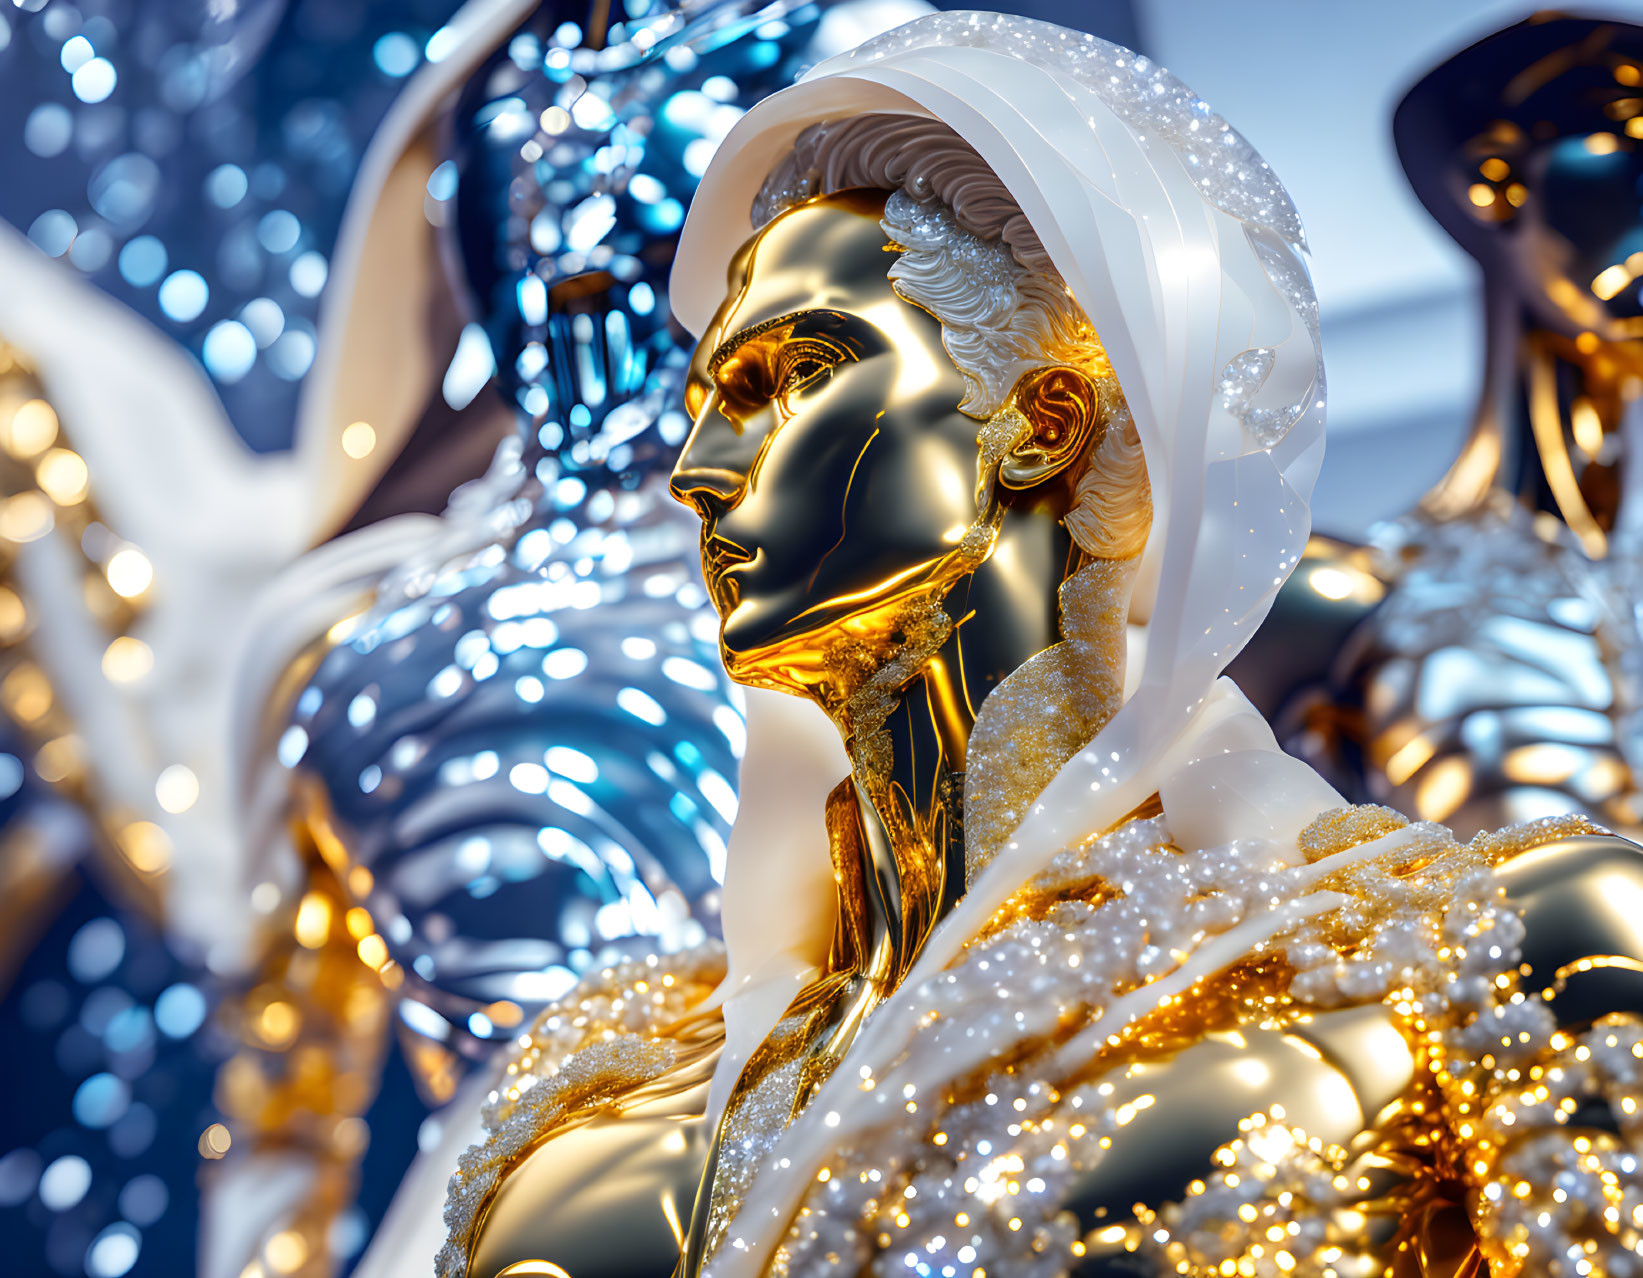 Golden Humanoid Figure Sculpture with Reflective Surfaces and Blurred Metallic Background